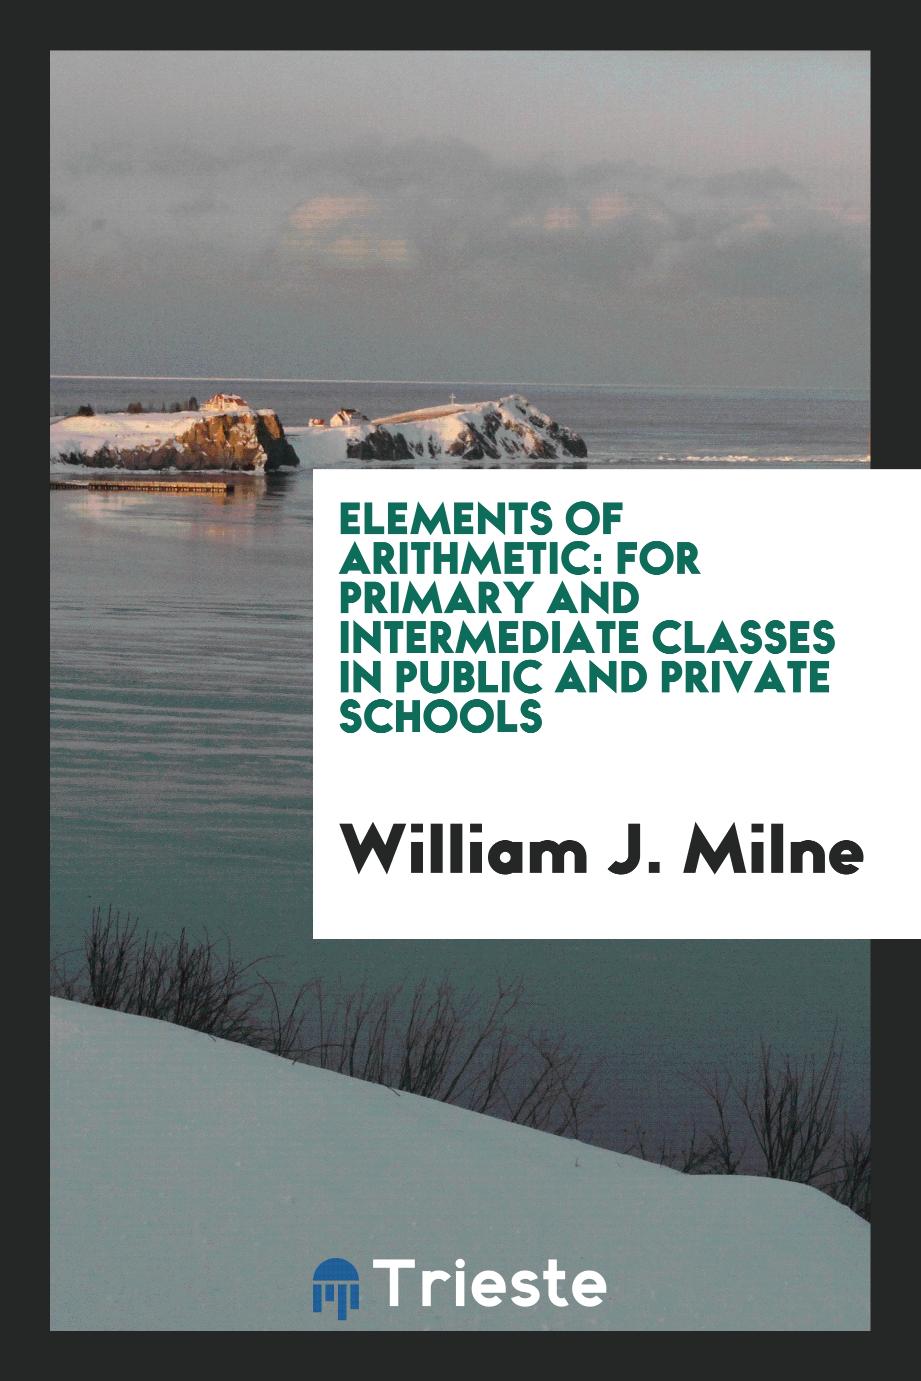 Elements of arithmetic: for primary and intermediate classes in public and private schools